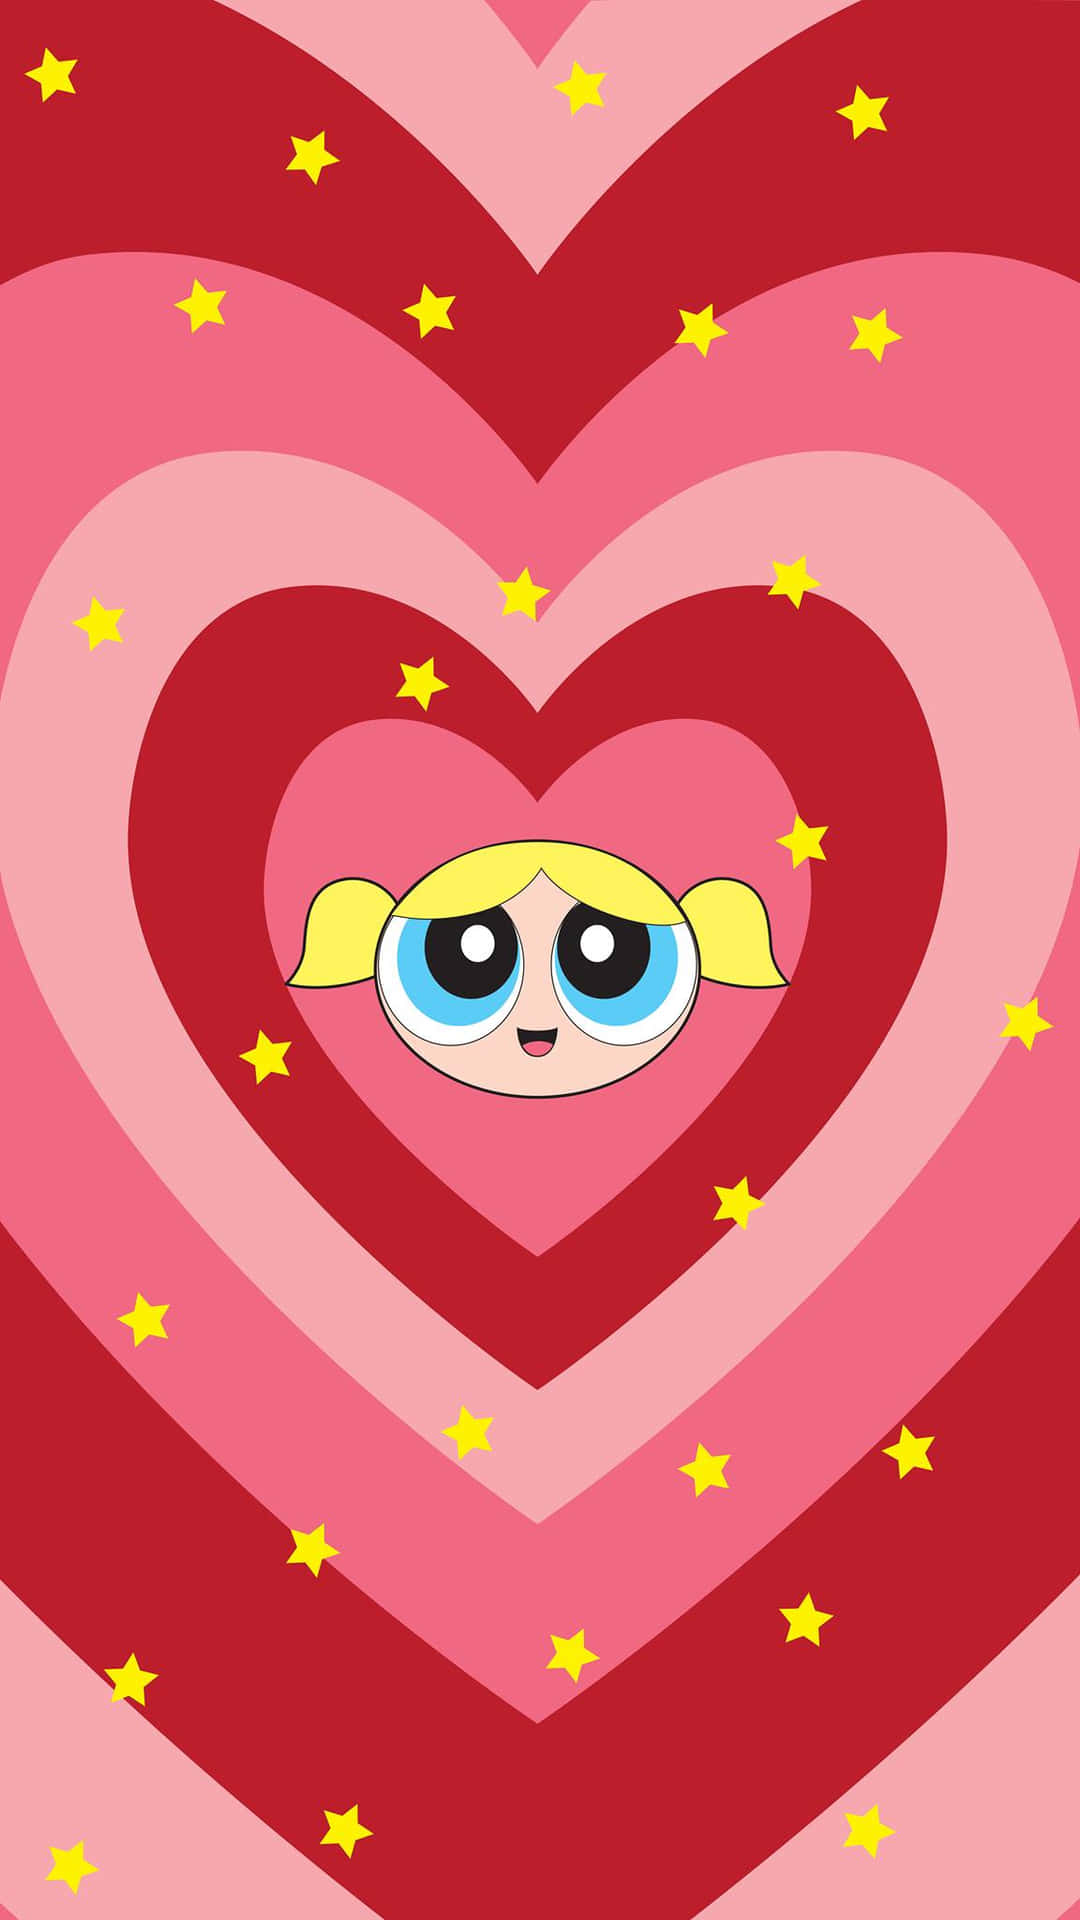 Spread the Power of Love with the Powerpuff Girls Wallpaper